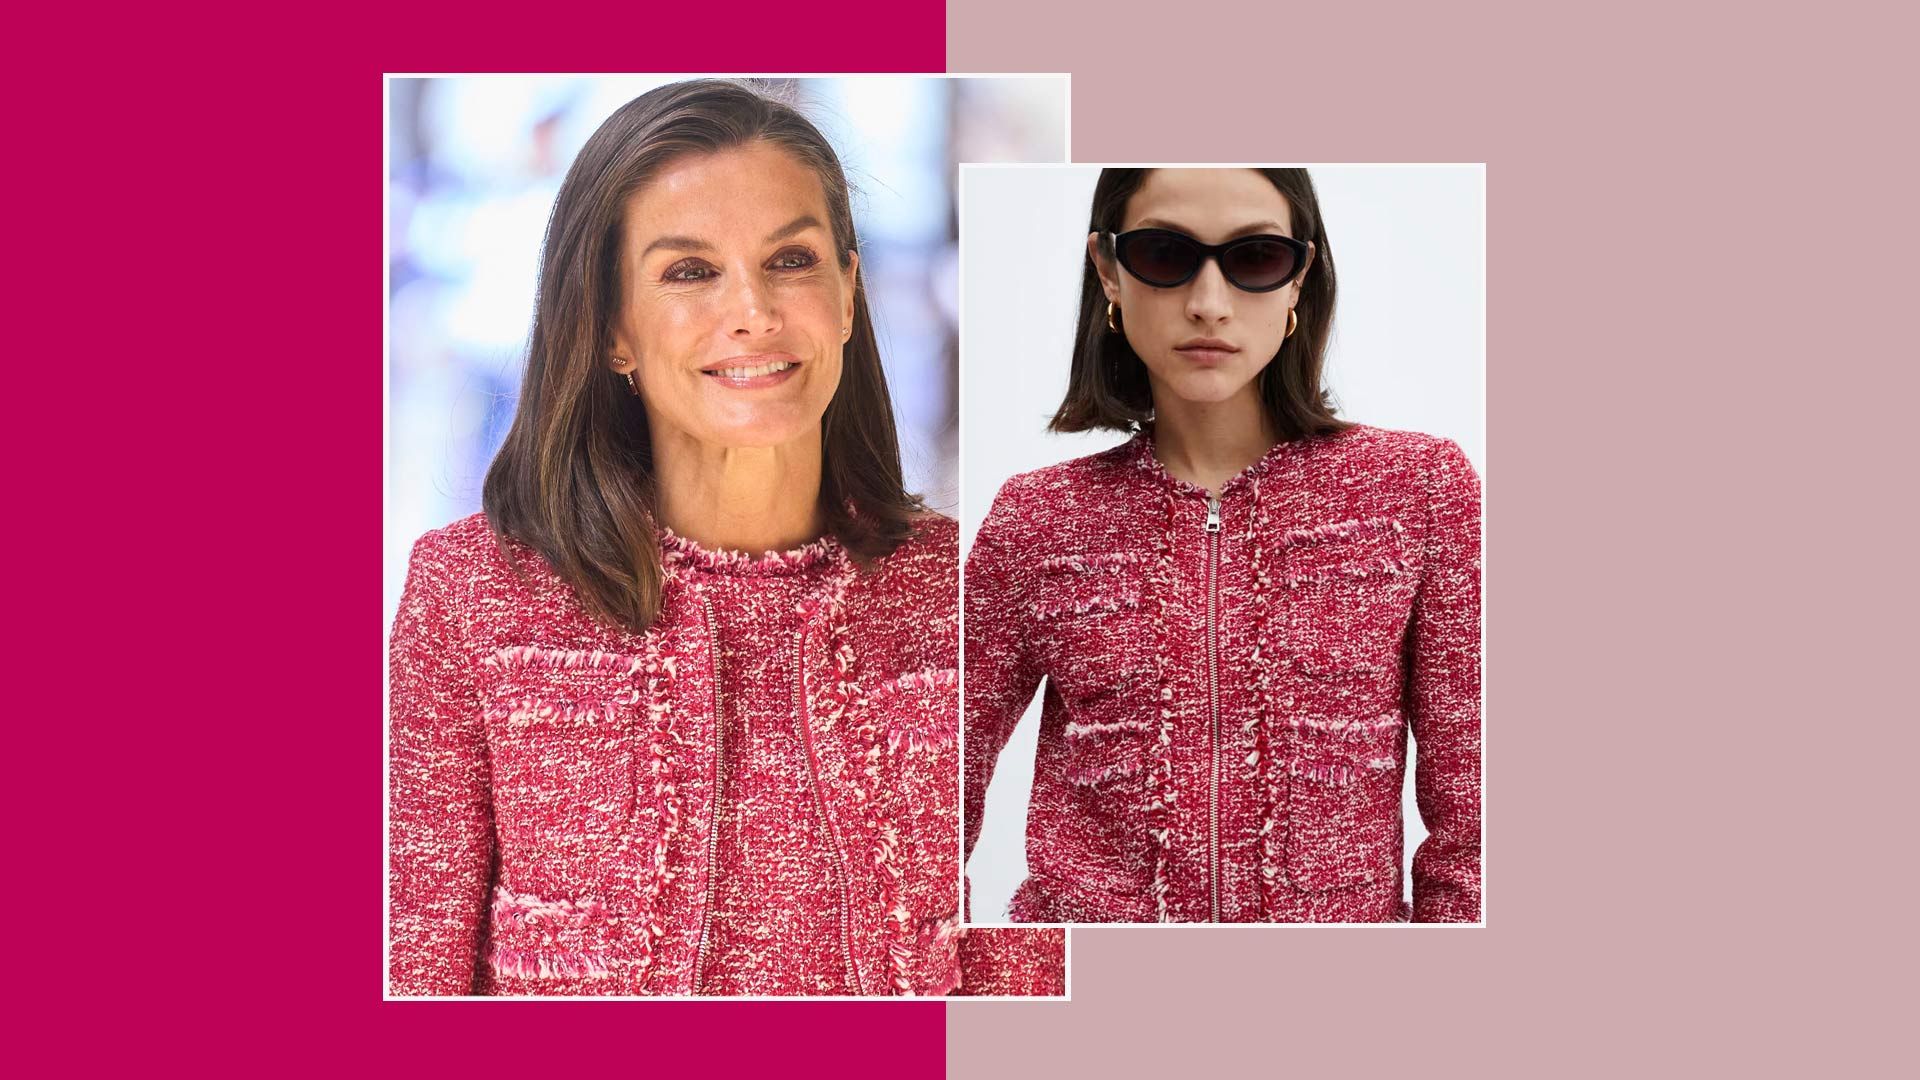 Queen Letizia stepped out in a fuchsia Mango tweed jacket and now I'm rushing to checkout so fast